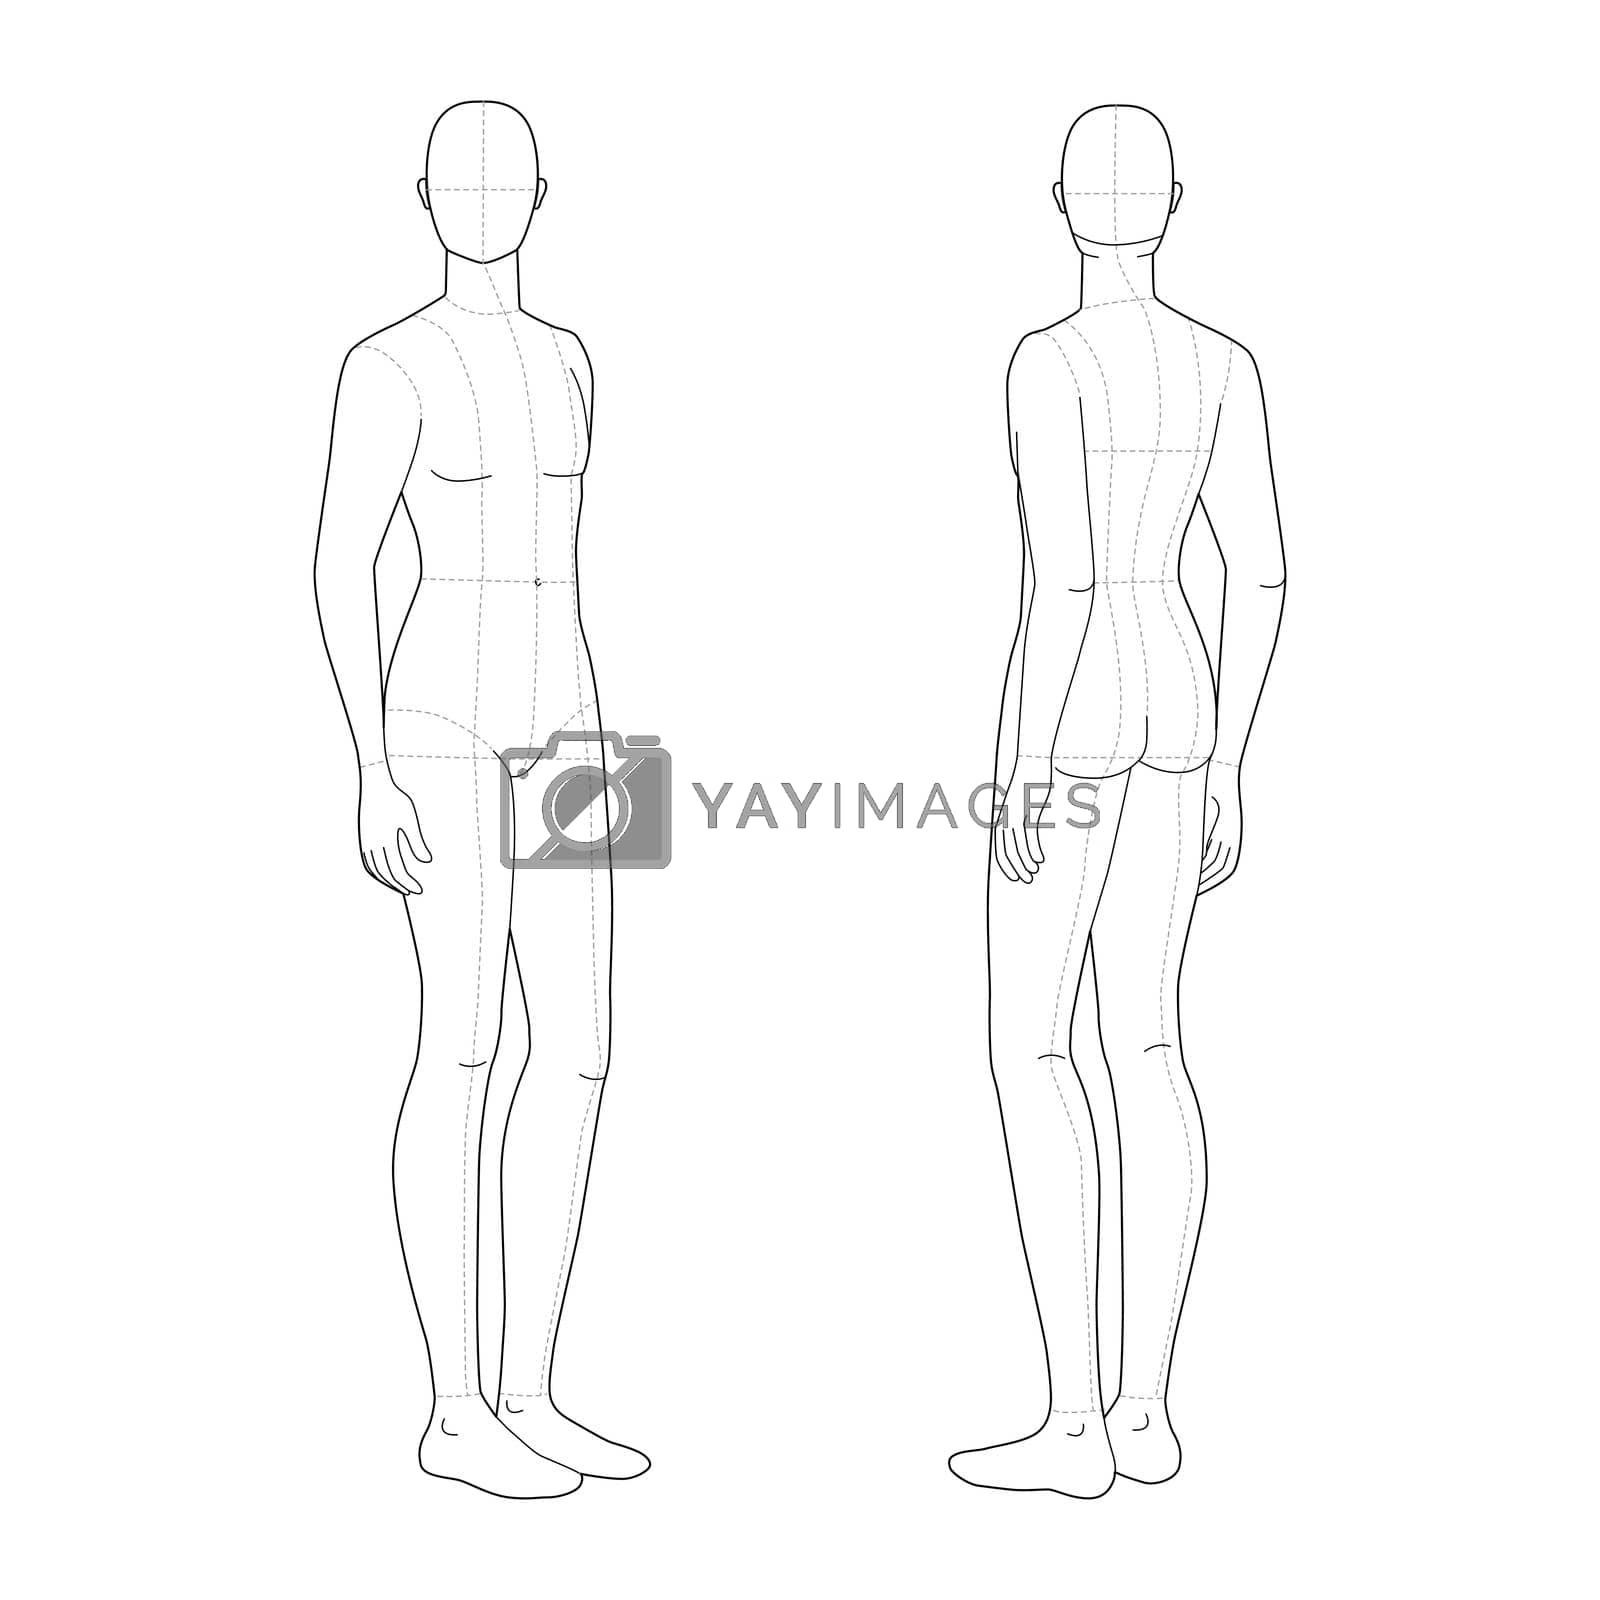 Royalty free image of Fashion template of standing men. by Vectoressa